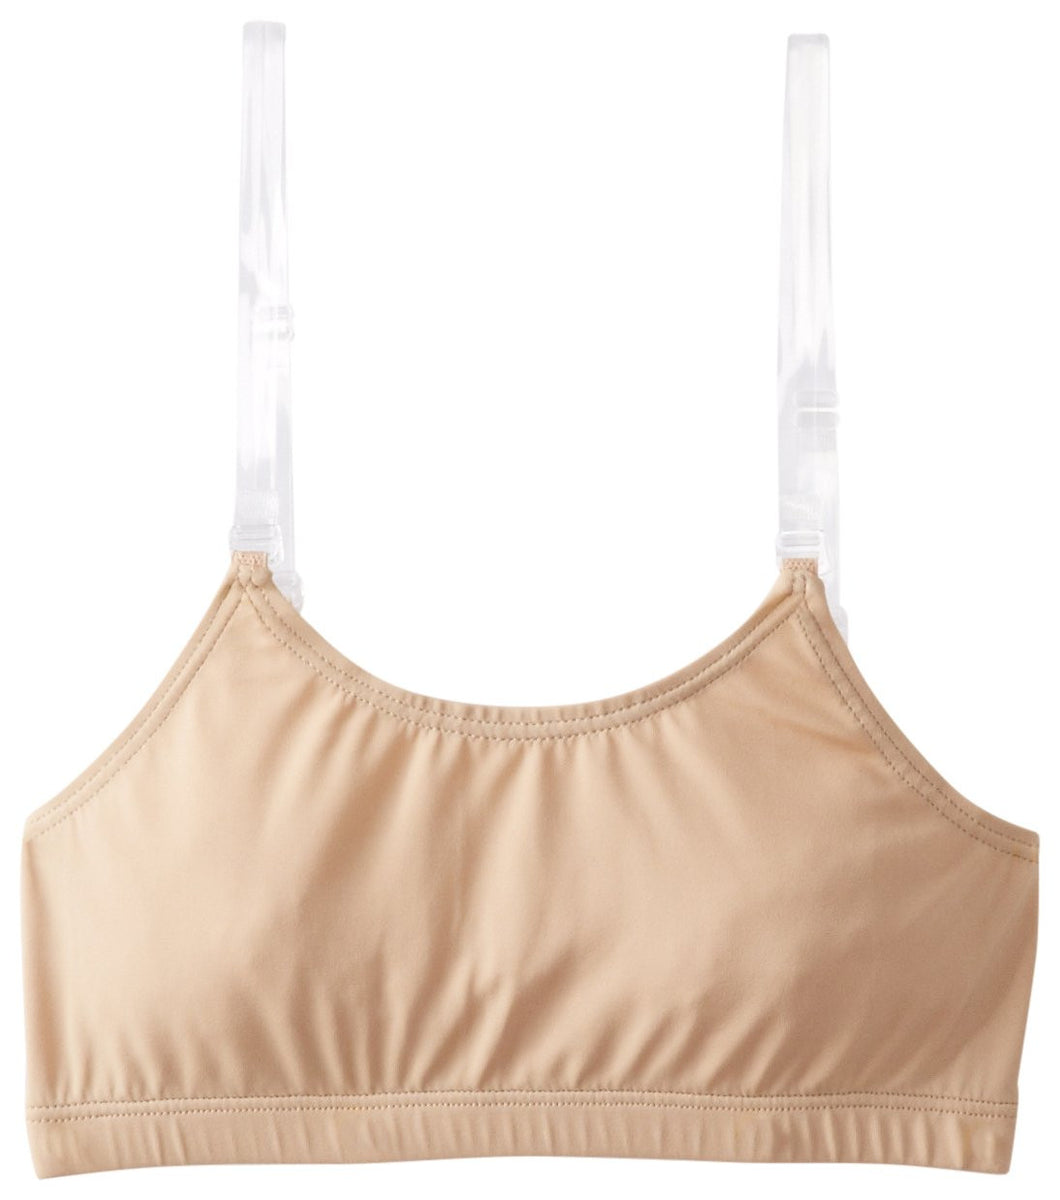  iMucci Professional Beige Clear Back Bra NO Sponge Backless  Bra for Ballet Dance : Sports & Outdoors